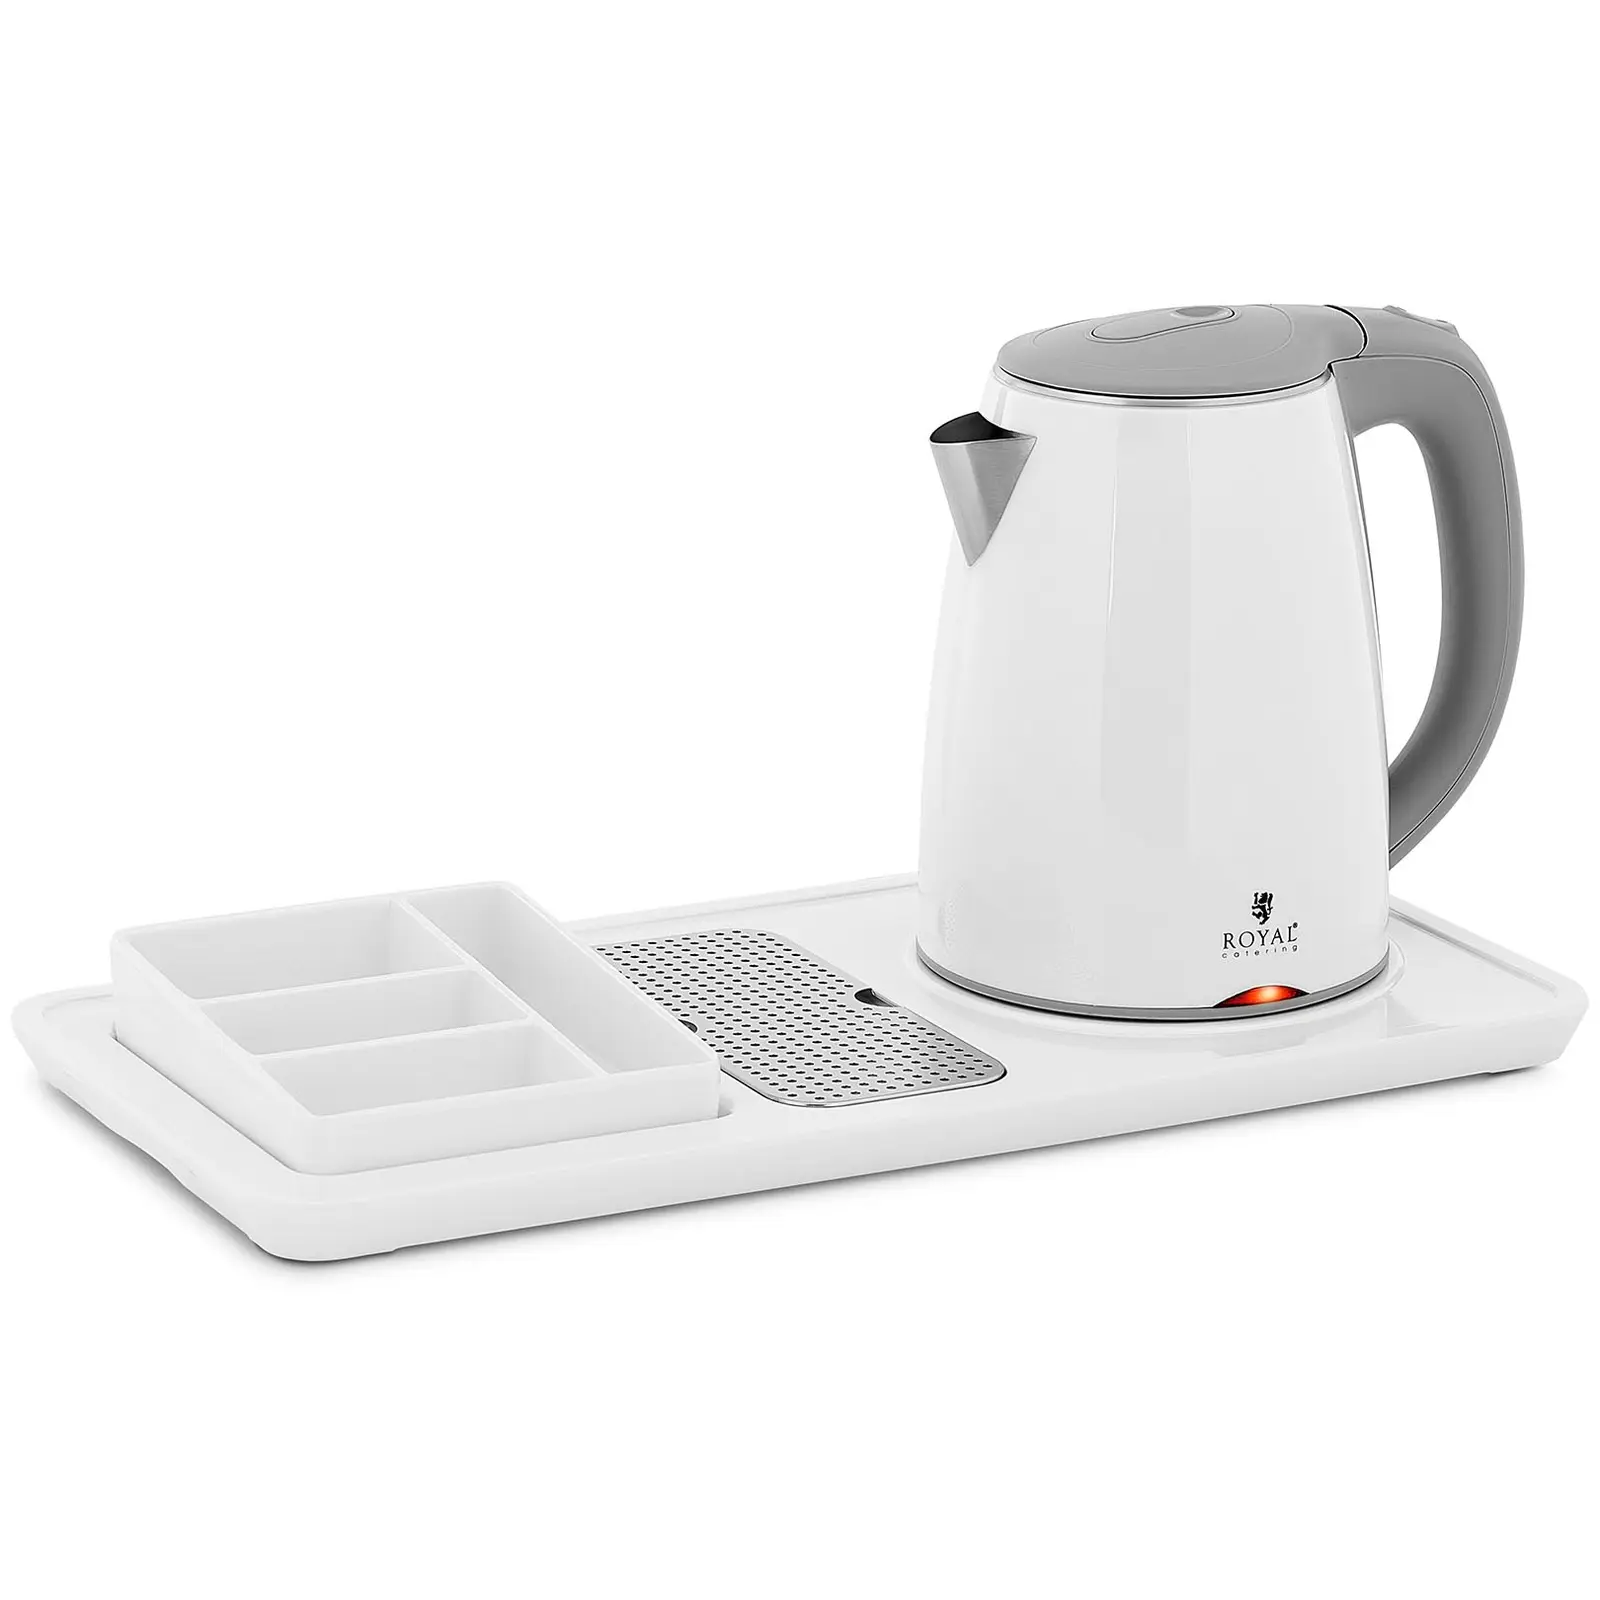 Professional Hotel Kettle - white - 1.2 L - 1800 W - with coffee and tea station